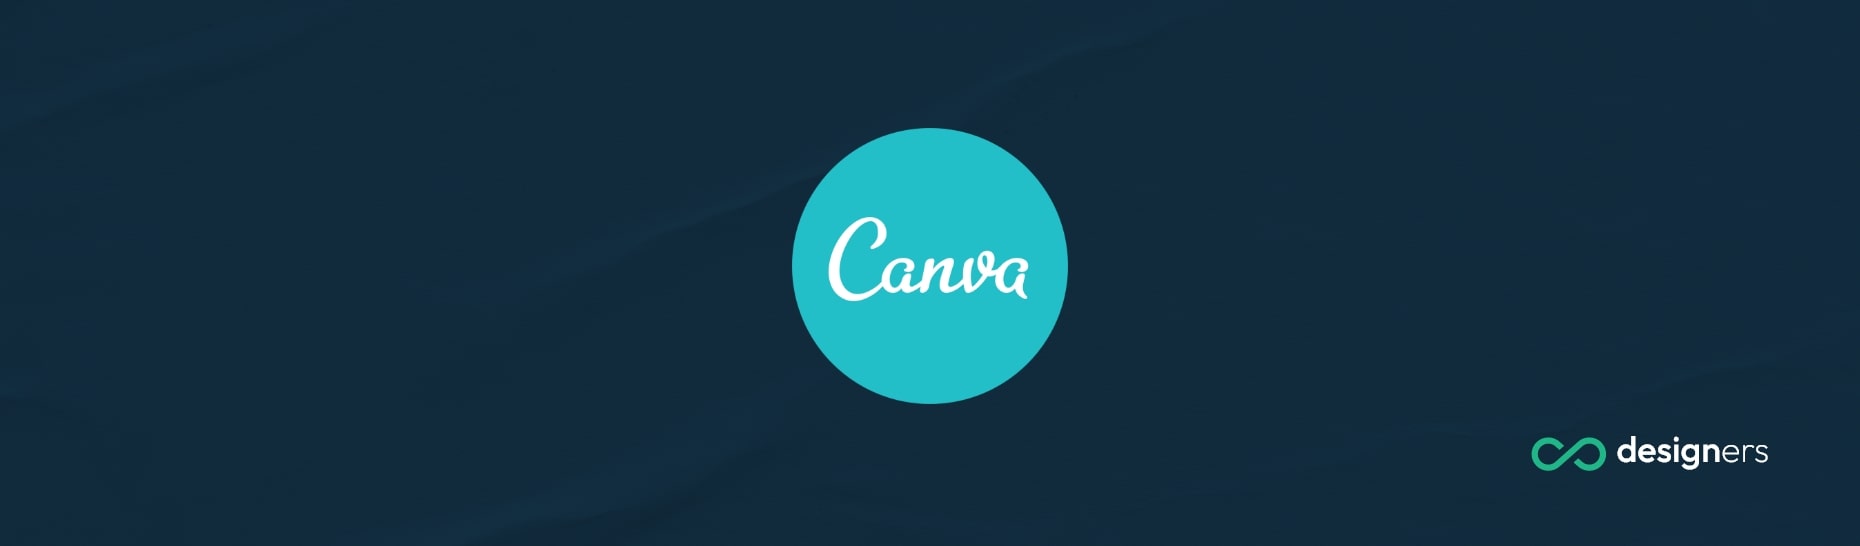 What Color Codes Does Canva Use?